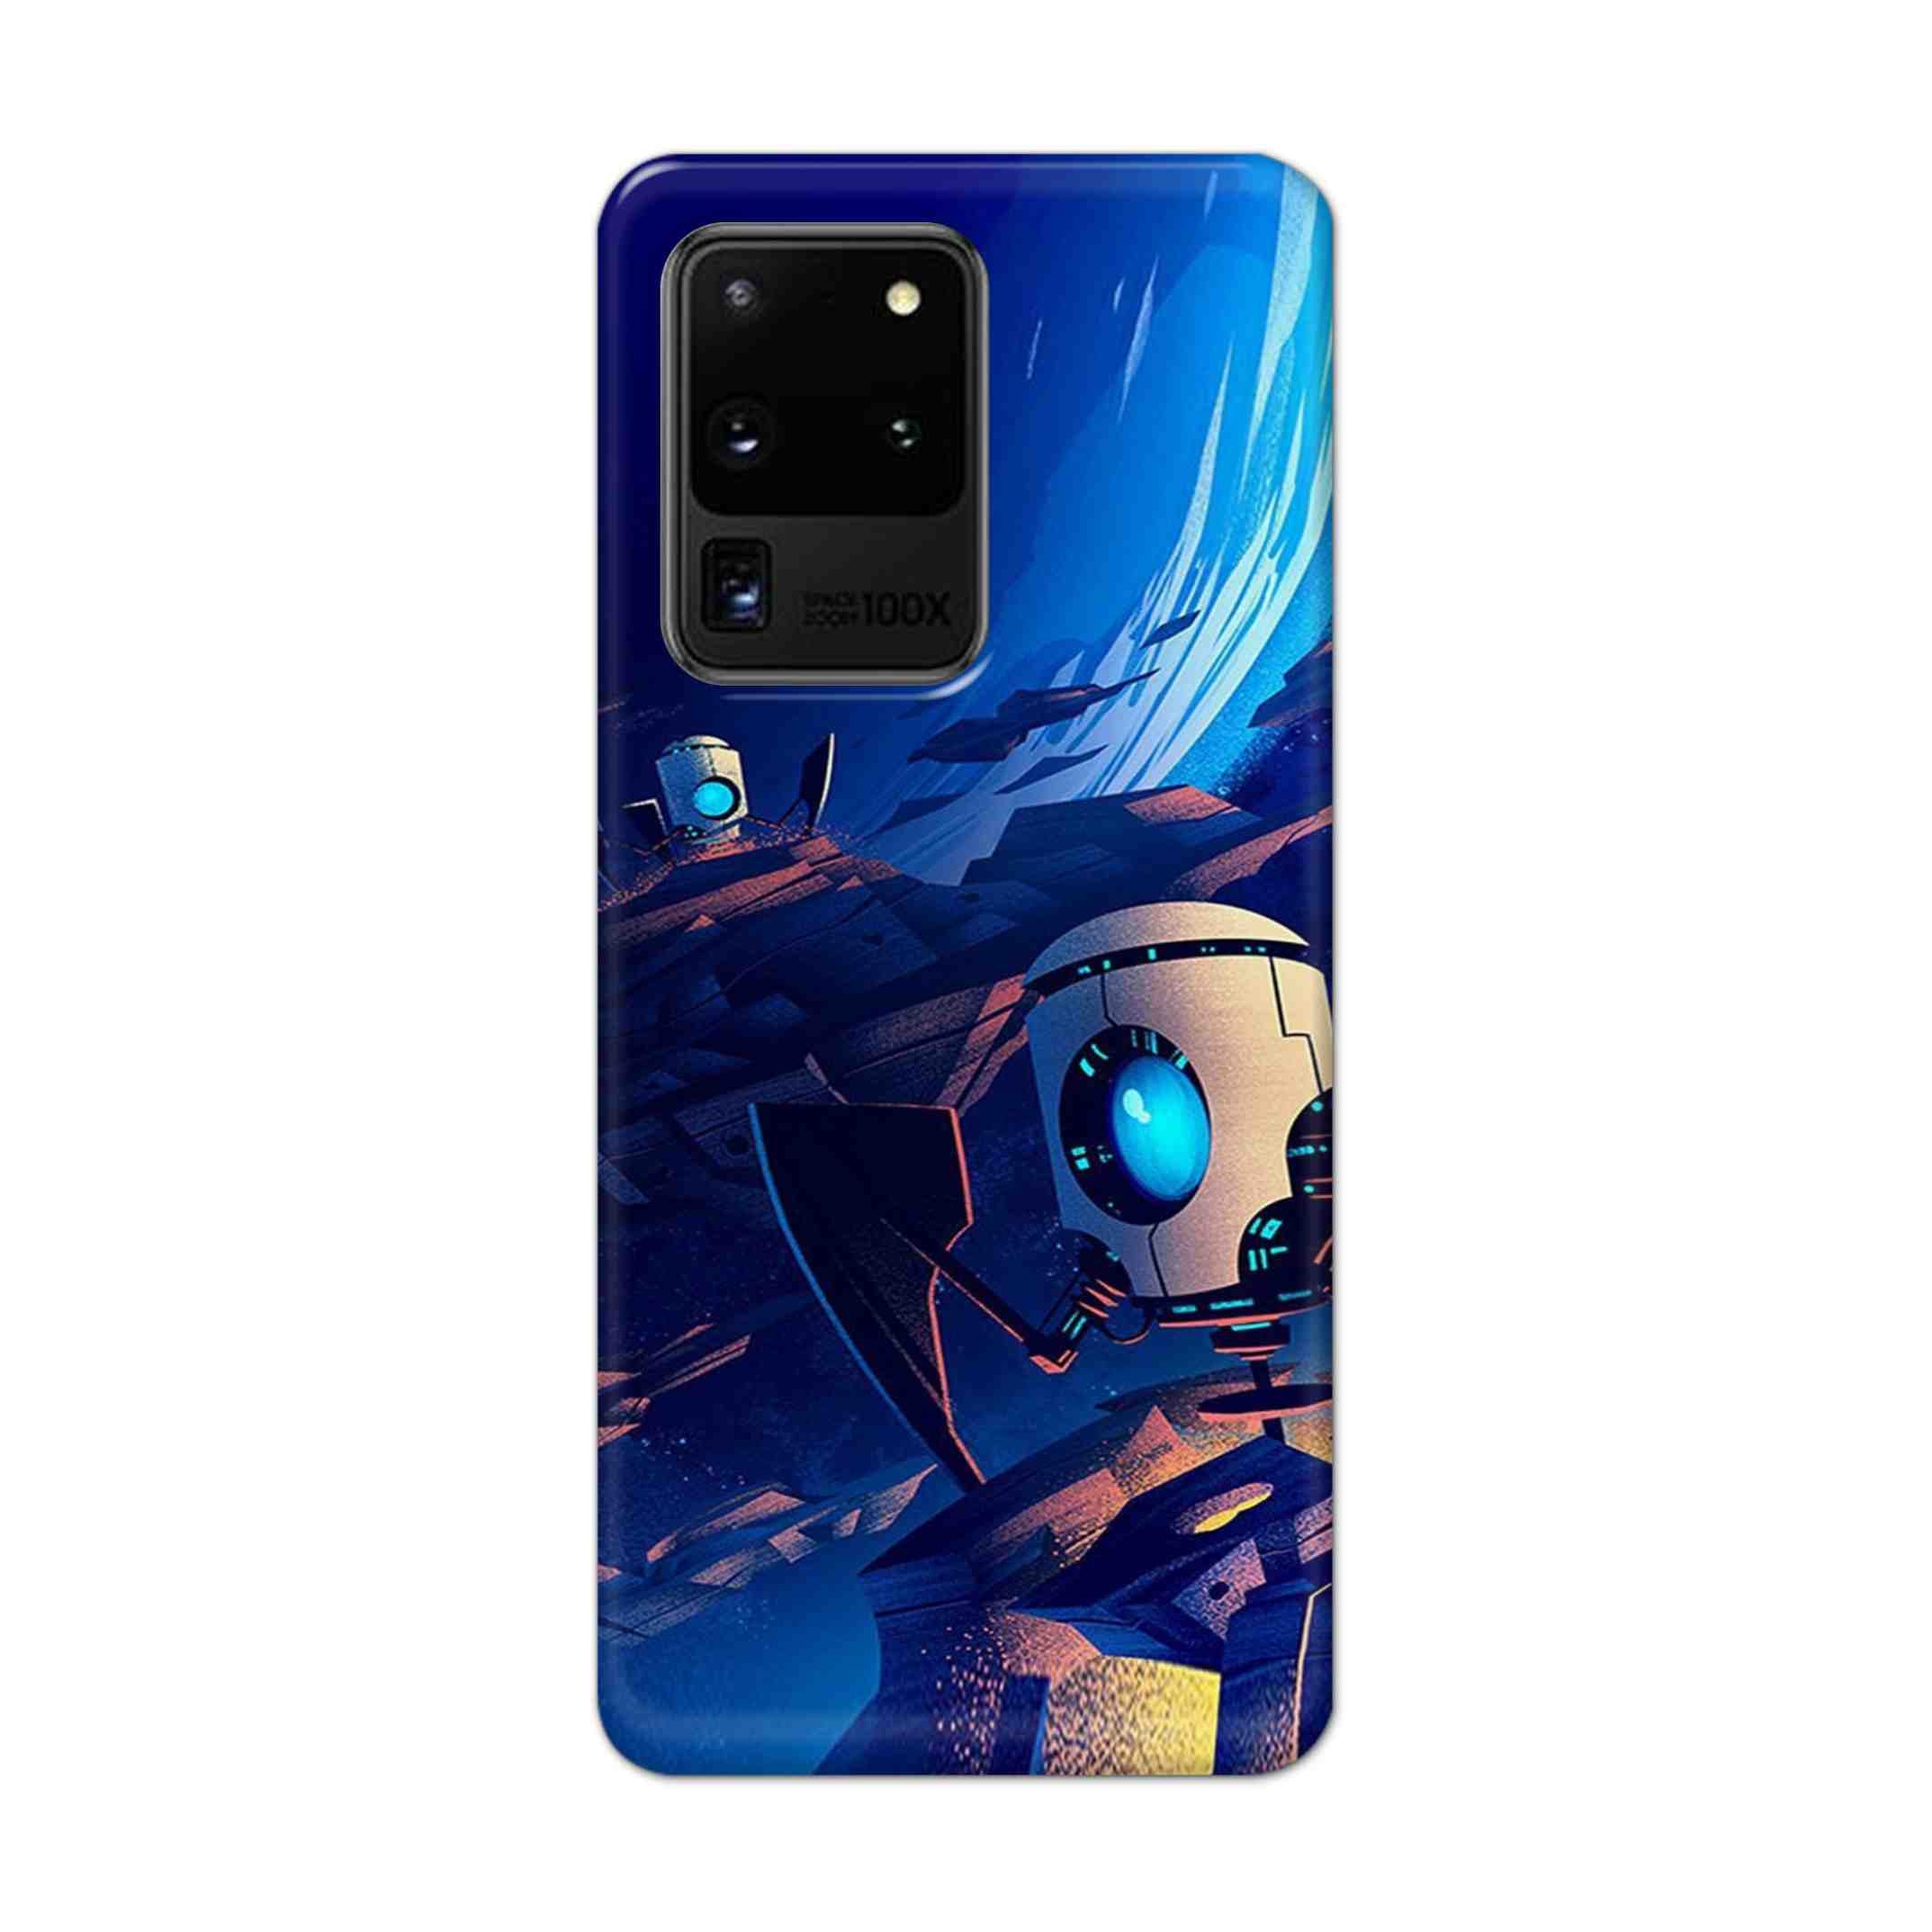 Buy Spaceship Robot Hard Back Mobile Phone Case Cover For Samsung Galaxy S20 Ultra Online